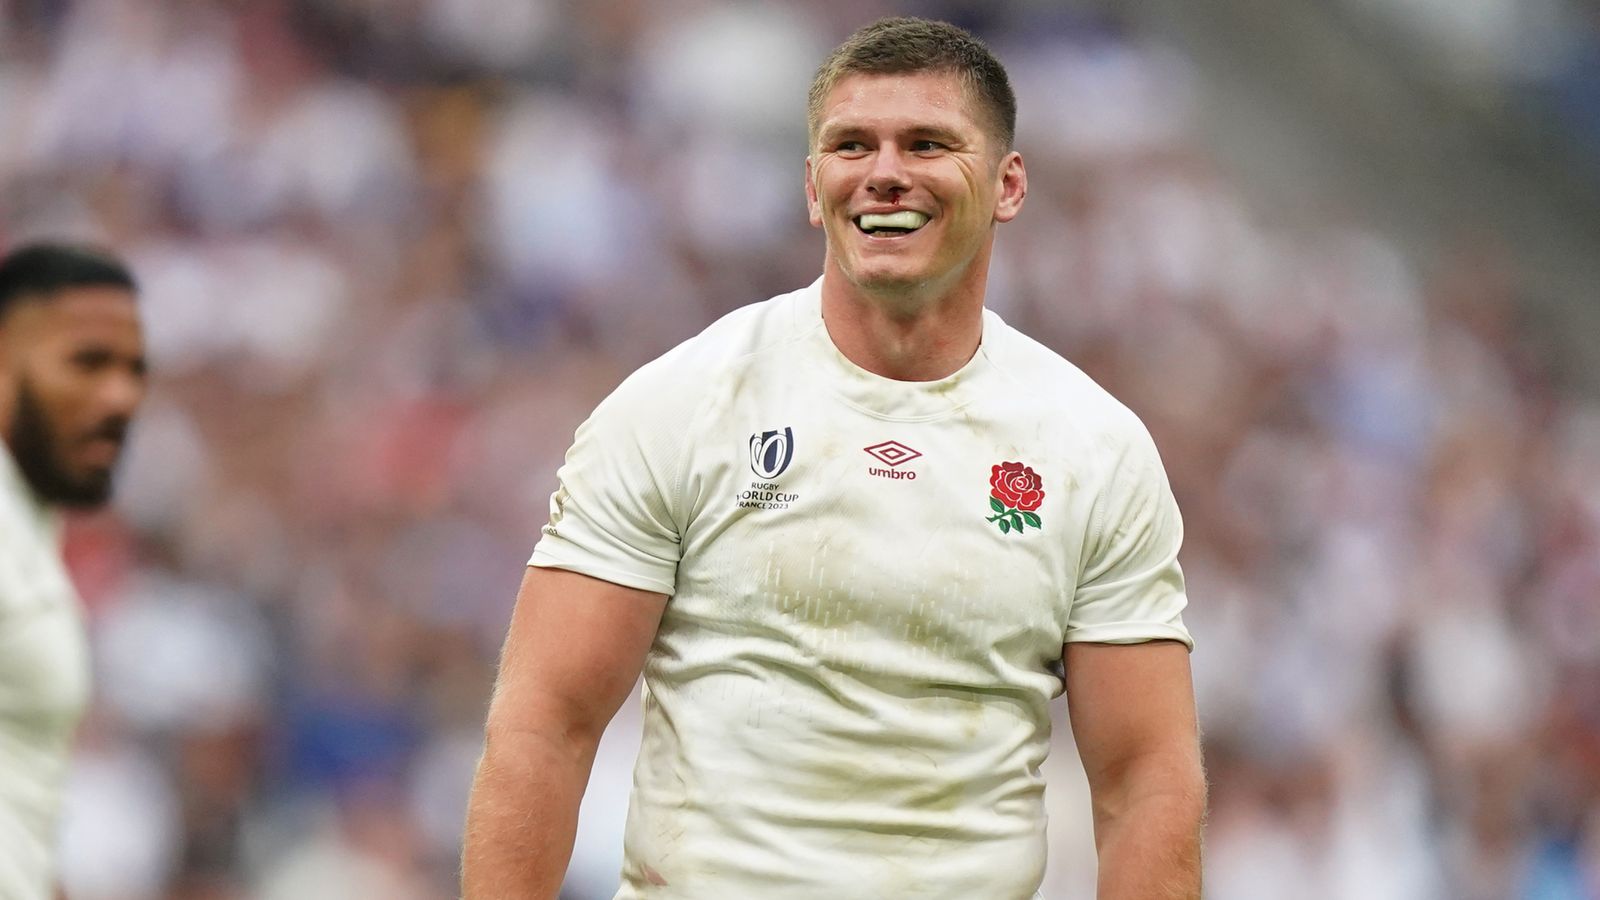 Owen Farrell: Racing 92 confirm signing of England international | Rugby Union News